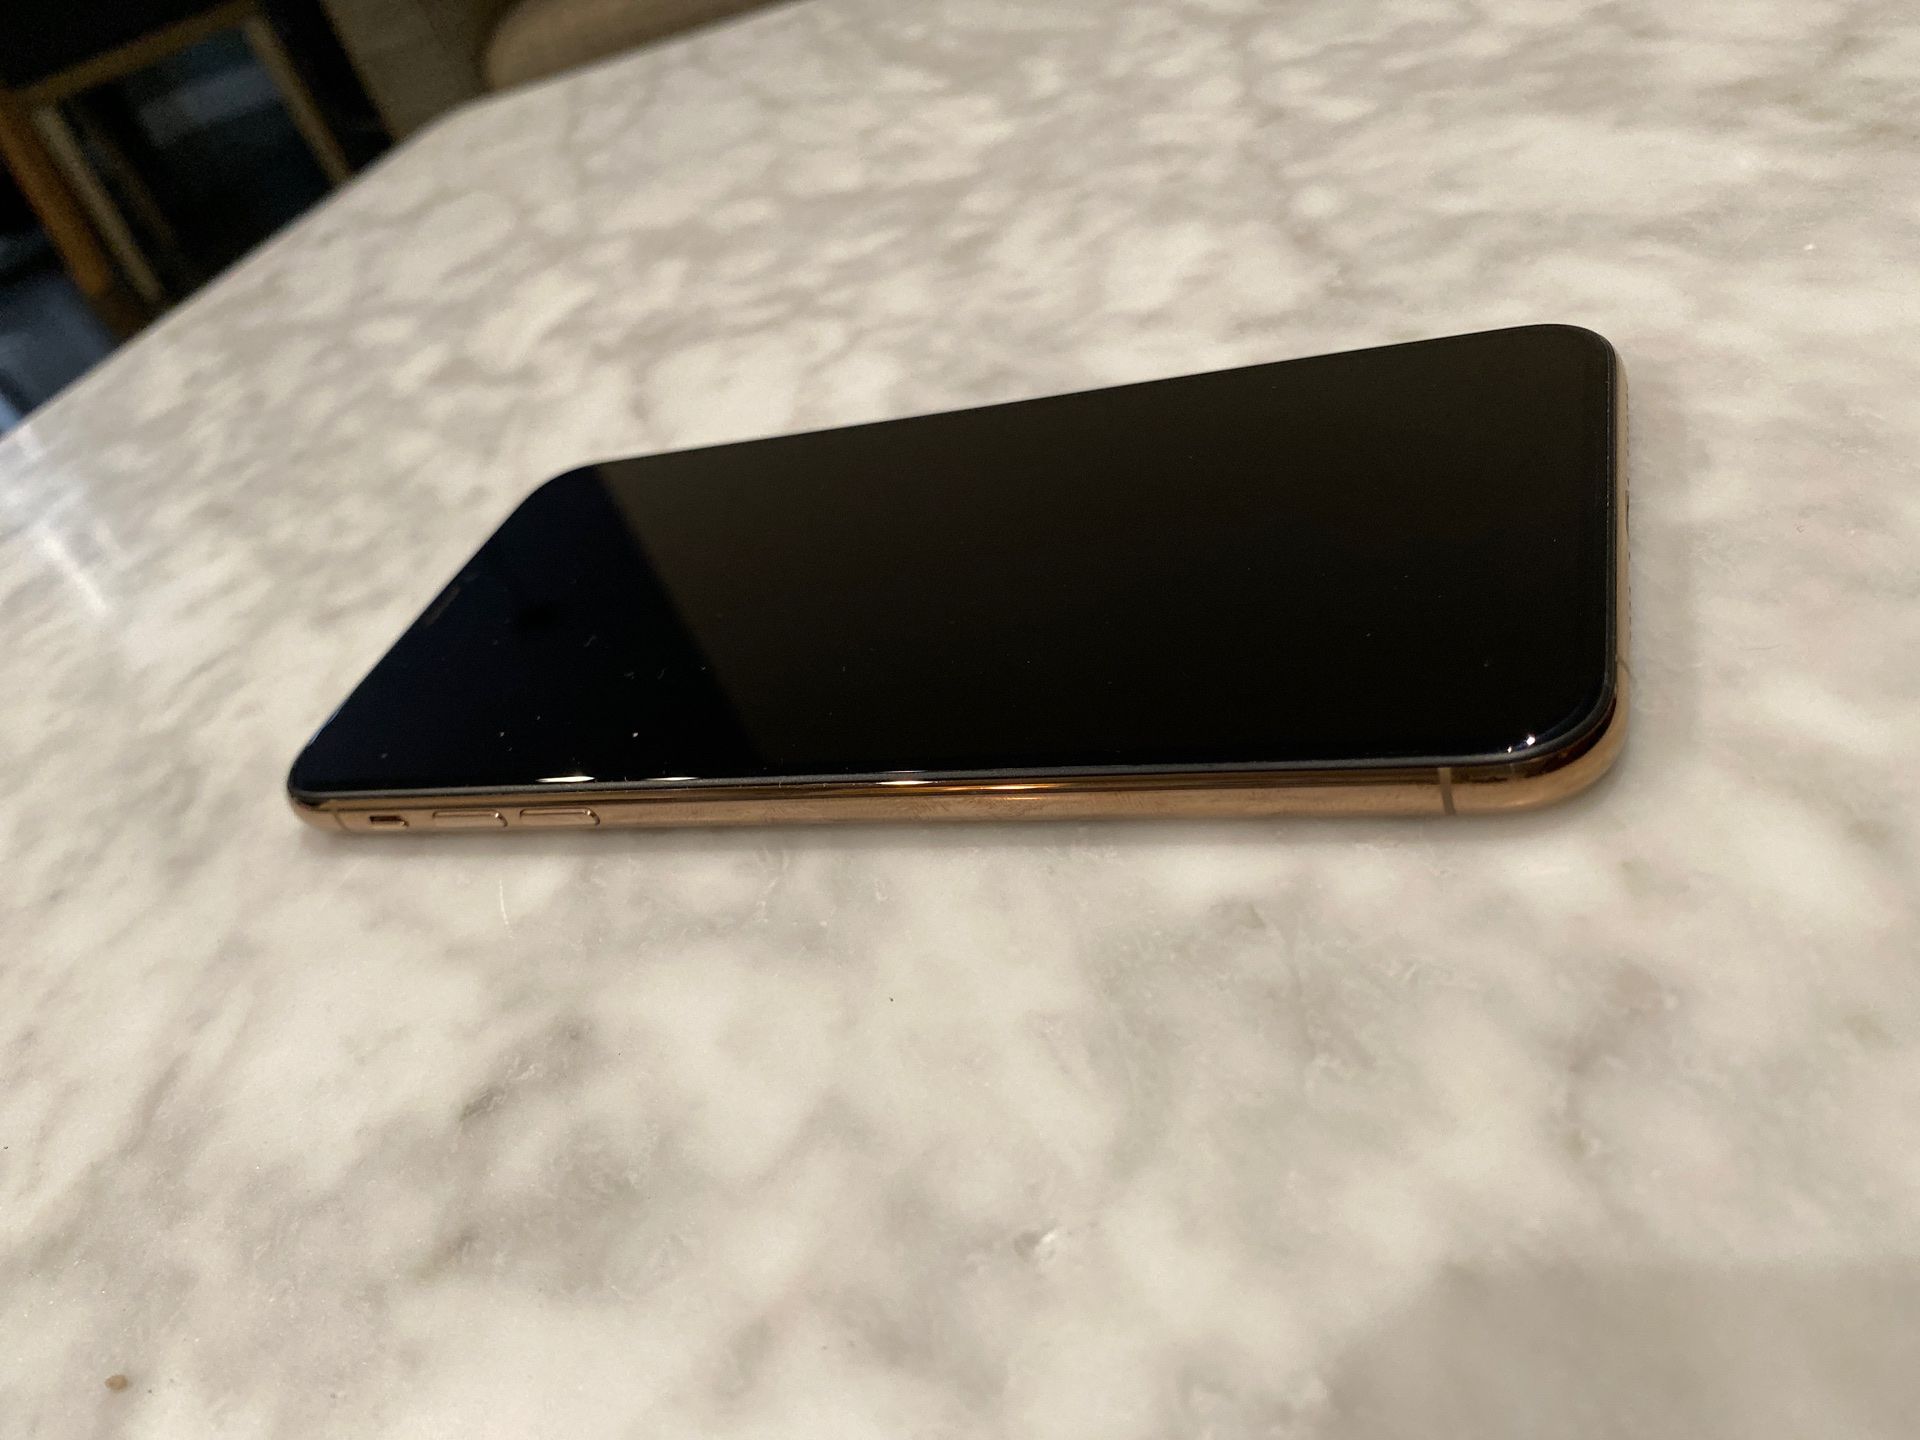 $650!!! Great! 64gb “Rose Gold” unlocked IPhone XS Max “Best Offer” will bring it to you!